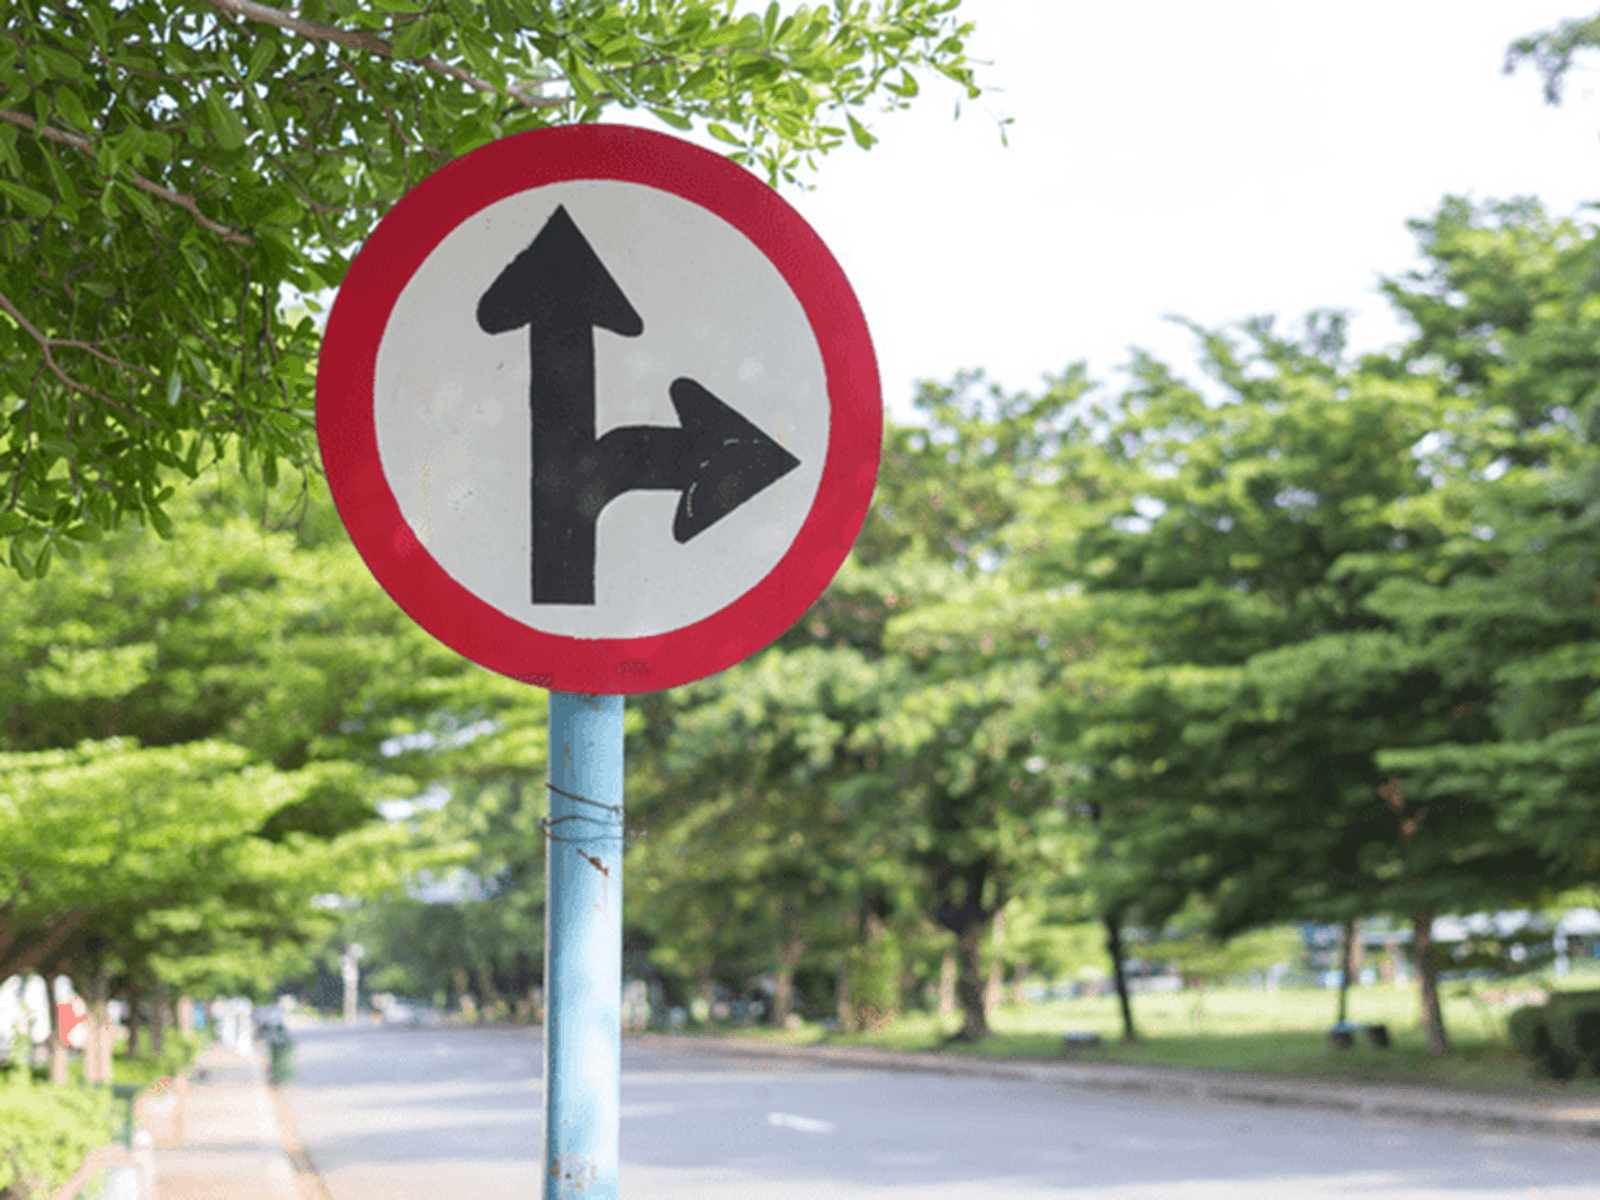 Image of a road sign pointing different directions